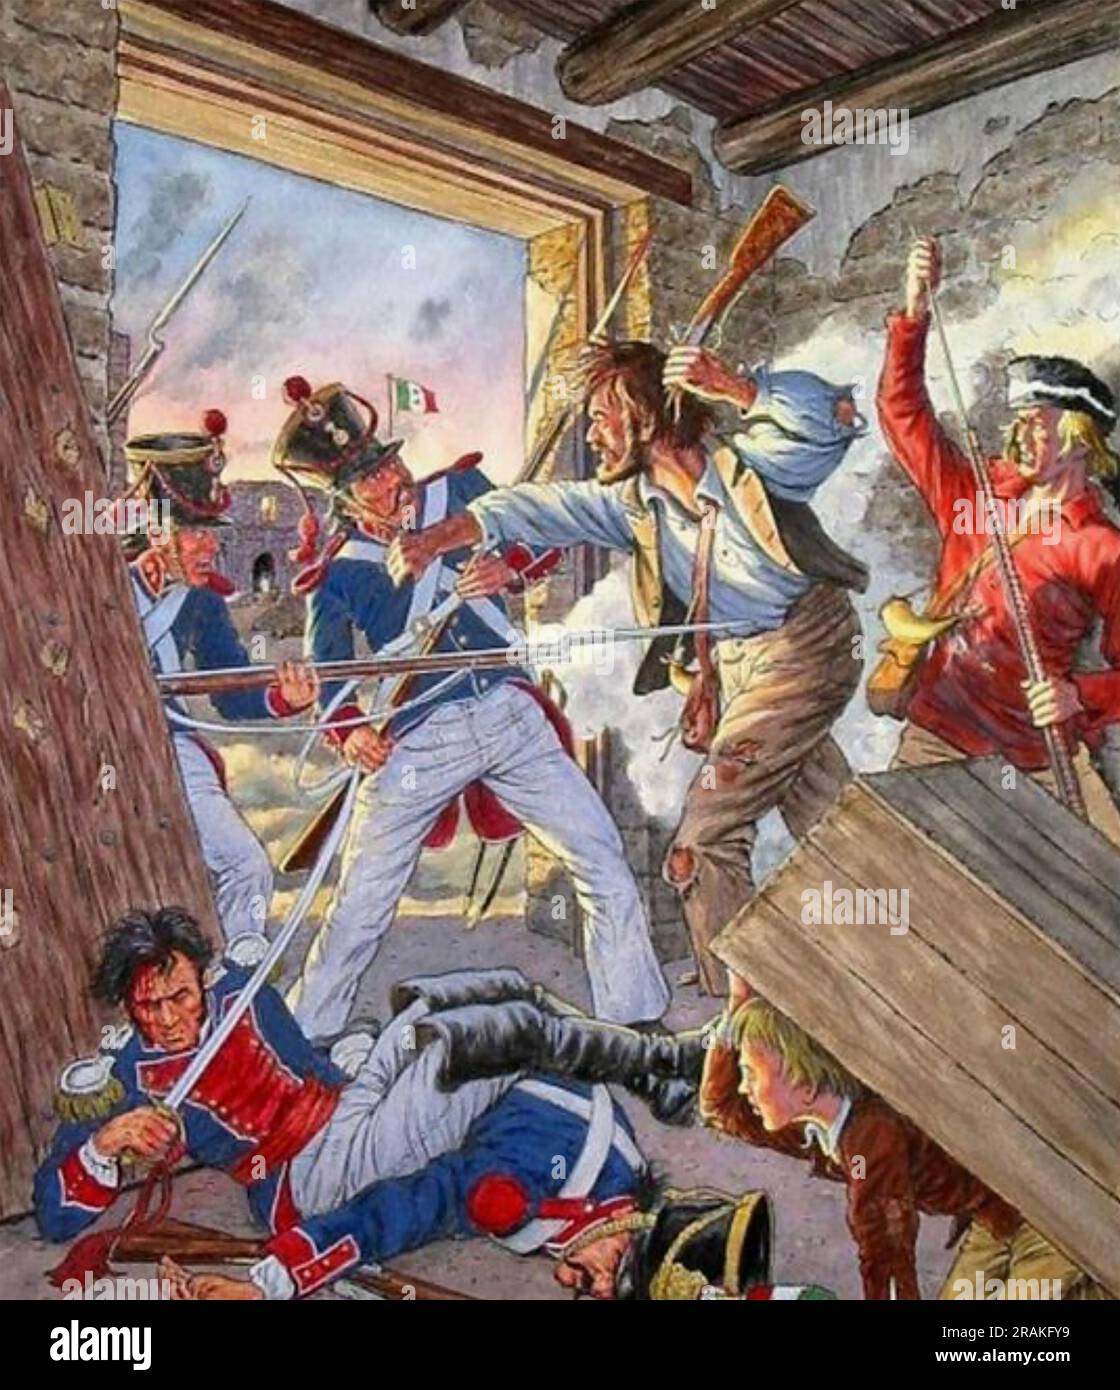 BATTLE OF THE ALAMO 23 February-6 March 1836. Jim (James) Bowie fights the Mexican soldiers. Stock Photo